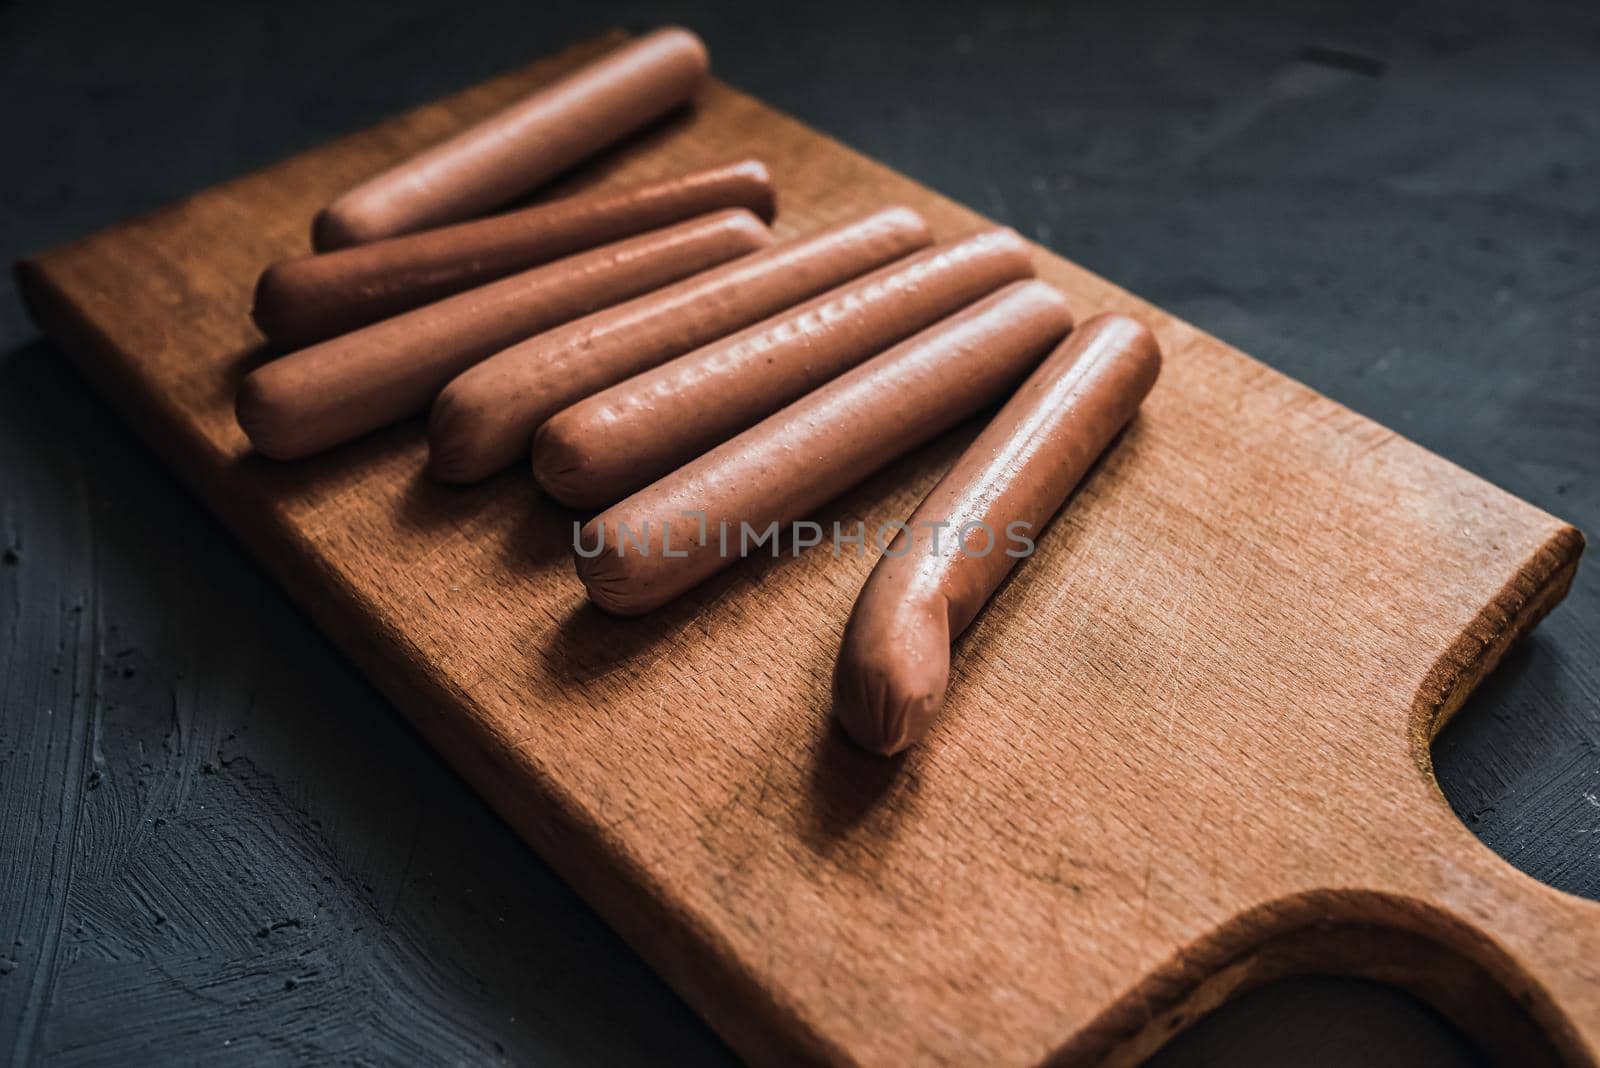 Boiled fried sausages sausages lie on a wooden kitchen board scratched against a dark concrete background.